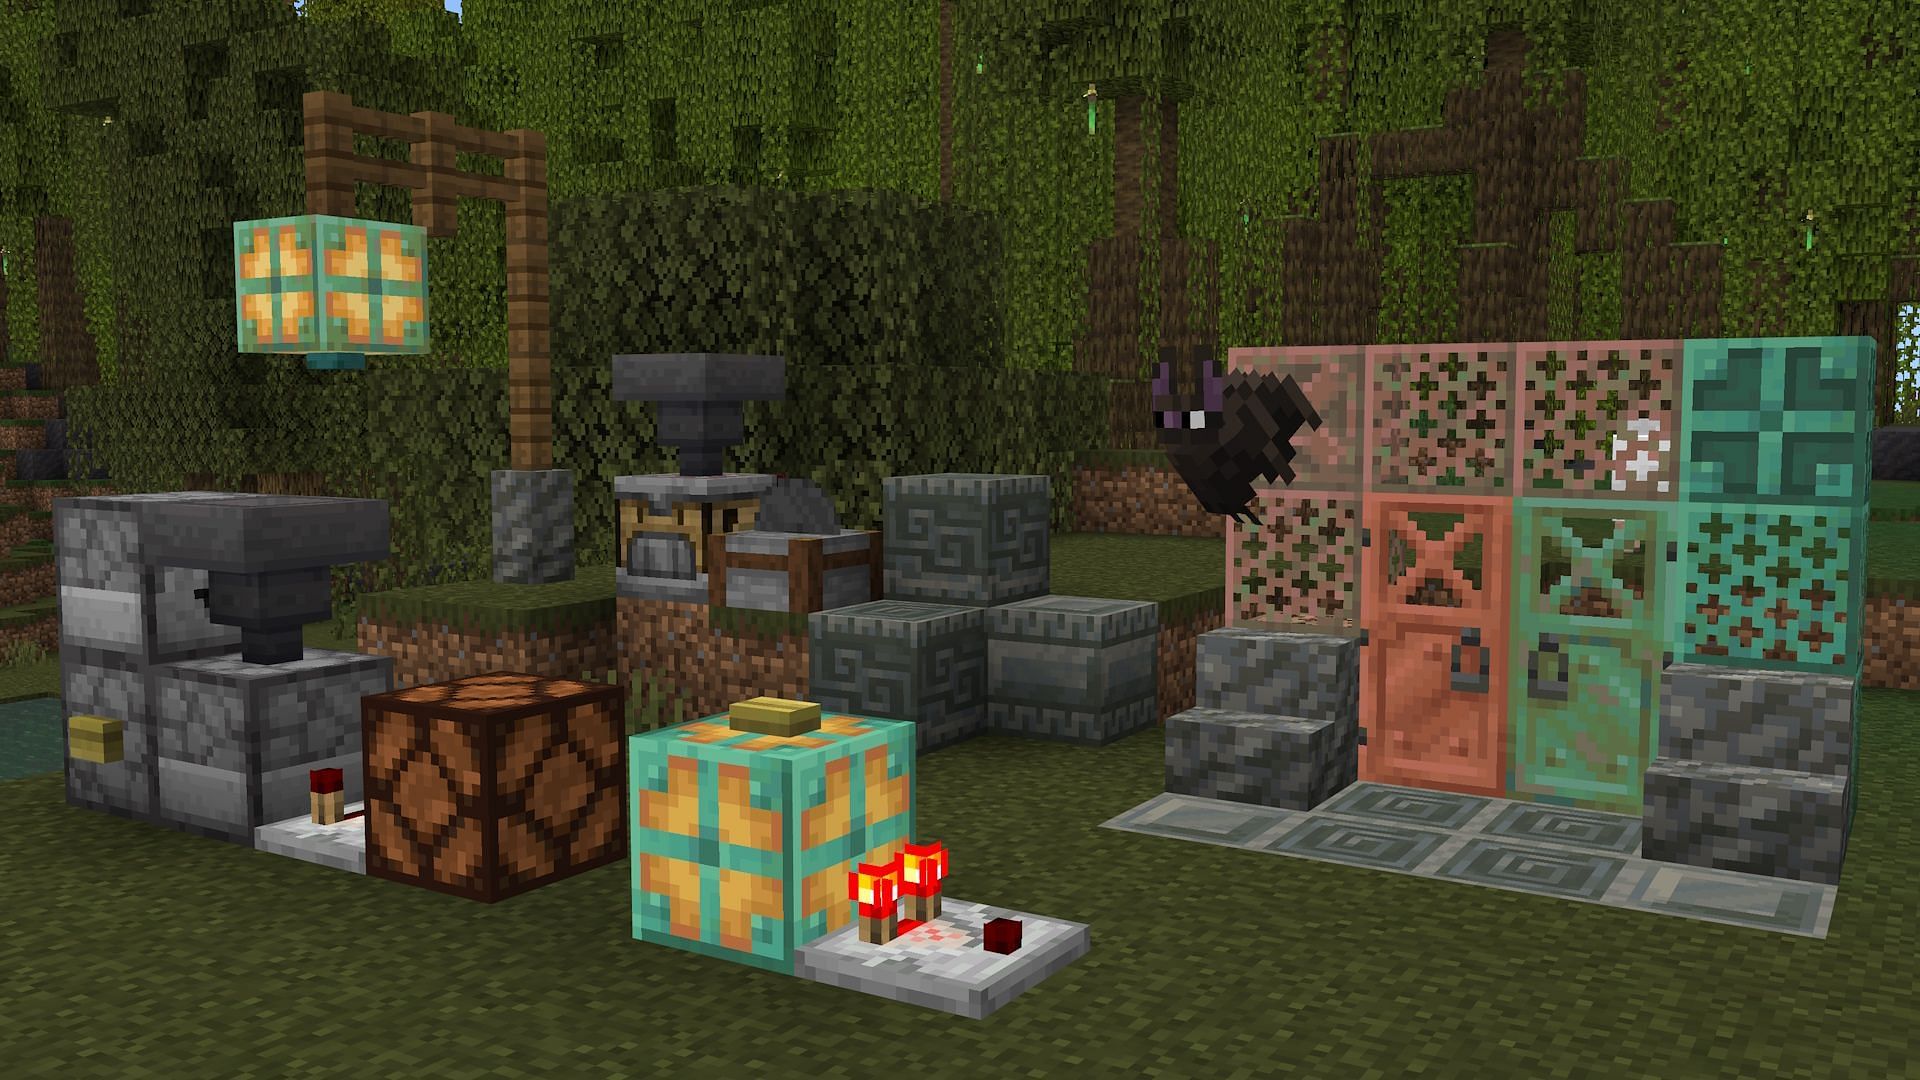 New features in Minecraft snapshot 23w43a